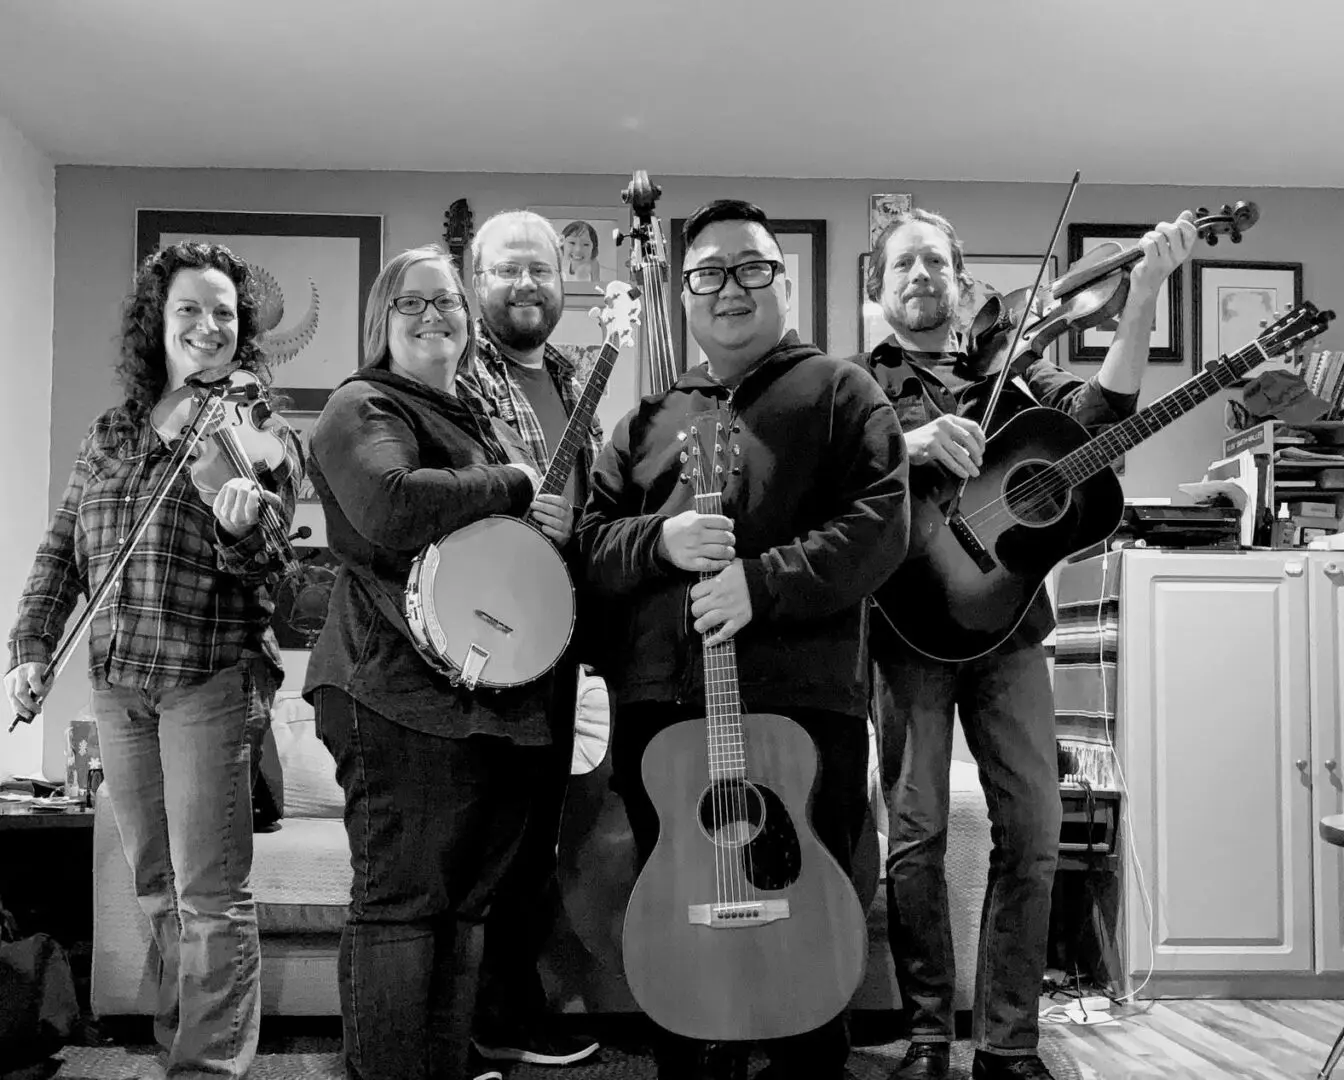 A group of people posing with guitars and banjos in a living room.